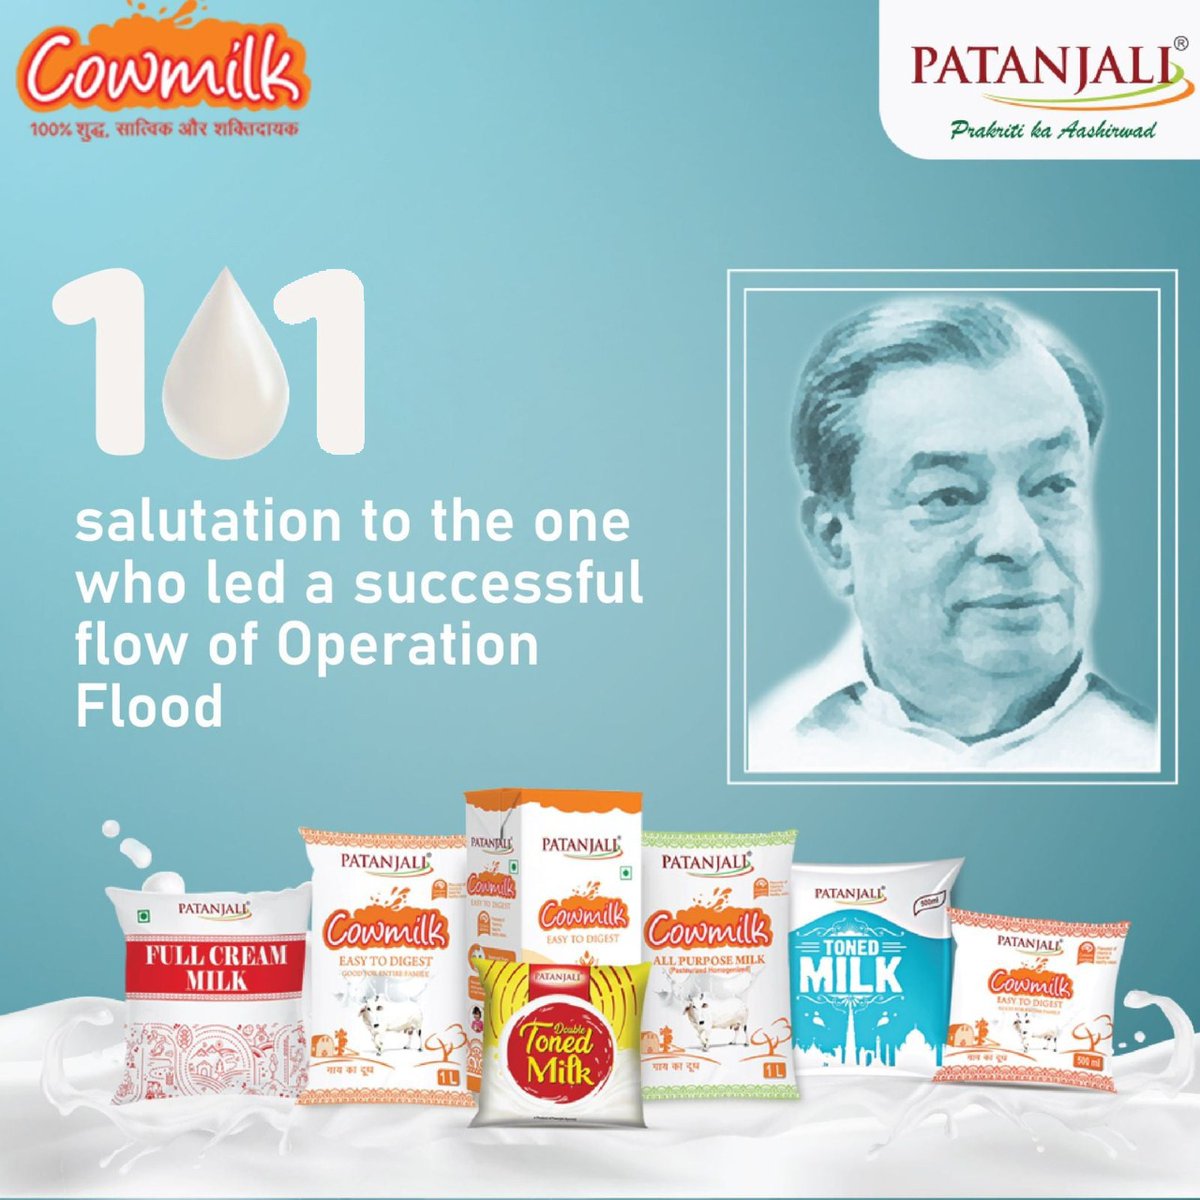 #PatanjaliDairy celebrating the #MilkMan of India, Dr. Verghese Kurien, the Father of India's White Revolution, on his 101th birth anniversary.

#NationalMilkDay #WhiteRevolution #PatanjaliProducts #patanjalidairyprducts